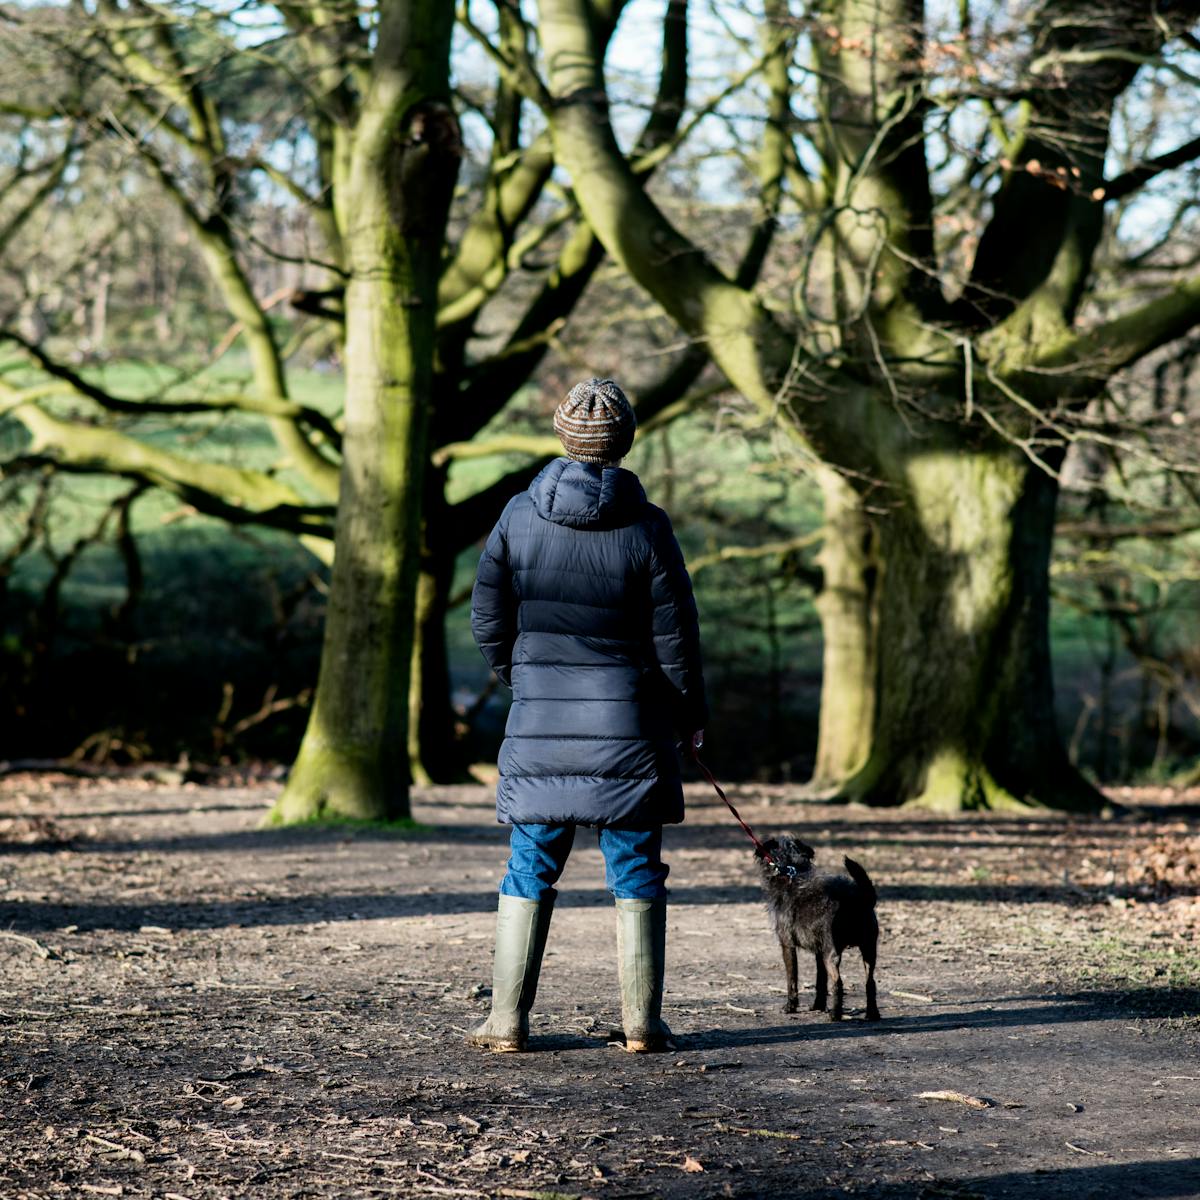 Photograph of a woman wearing a wooly hat, puffer coat and welly boots, standing with her back to the camera in wintery woodland setting. In her right hand she is holding a lead attached to a small black dog, also looking away from the camera. Low sunlight streaks through the trees from the left of frame.